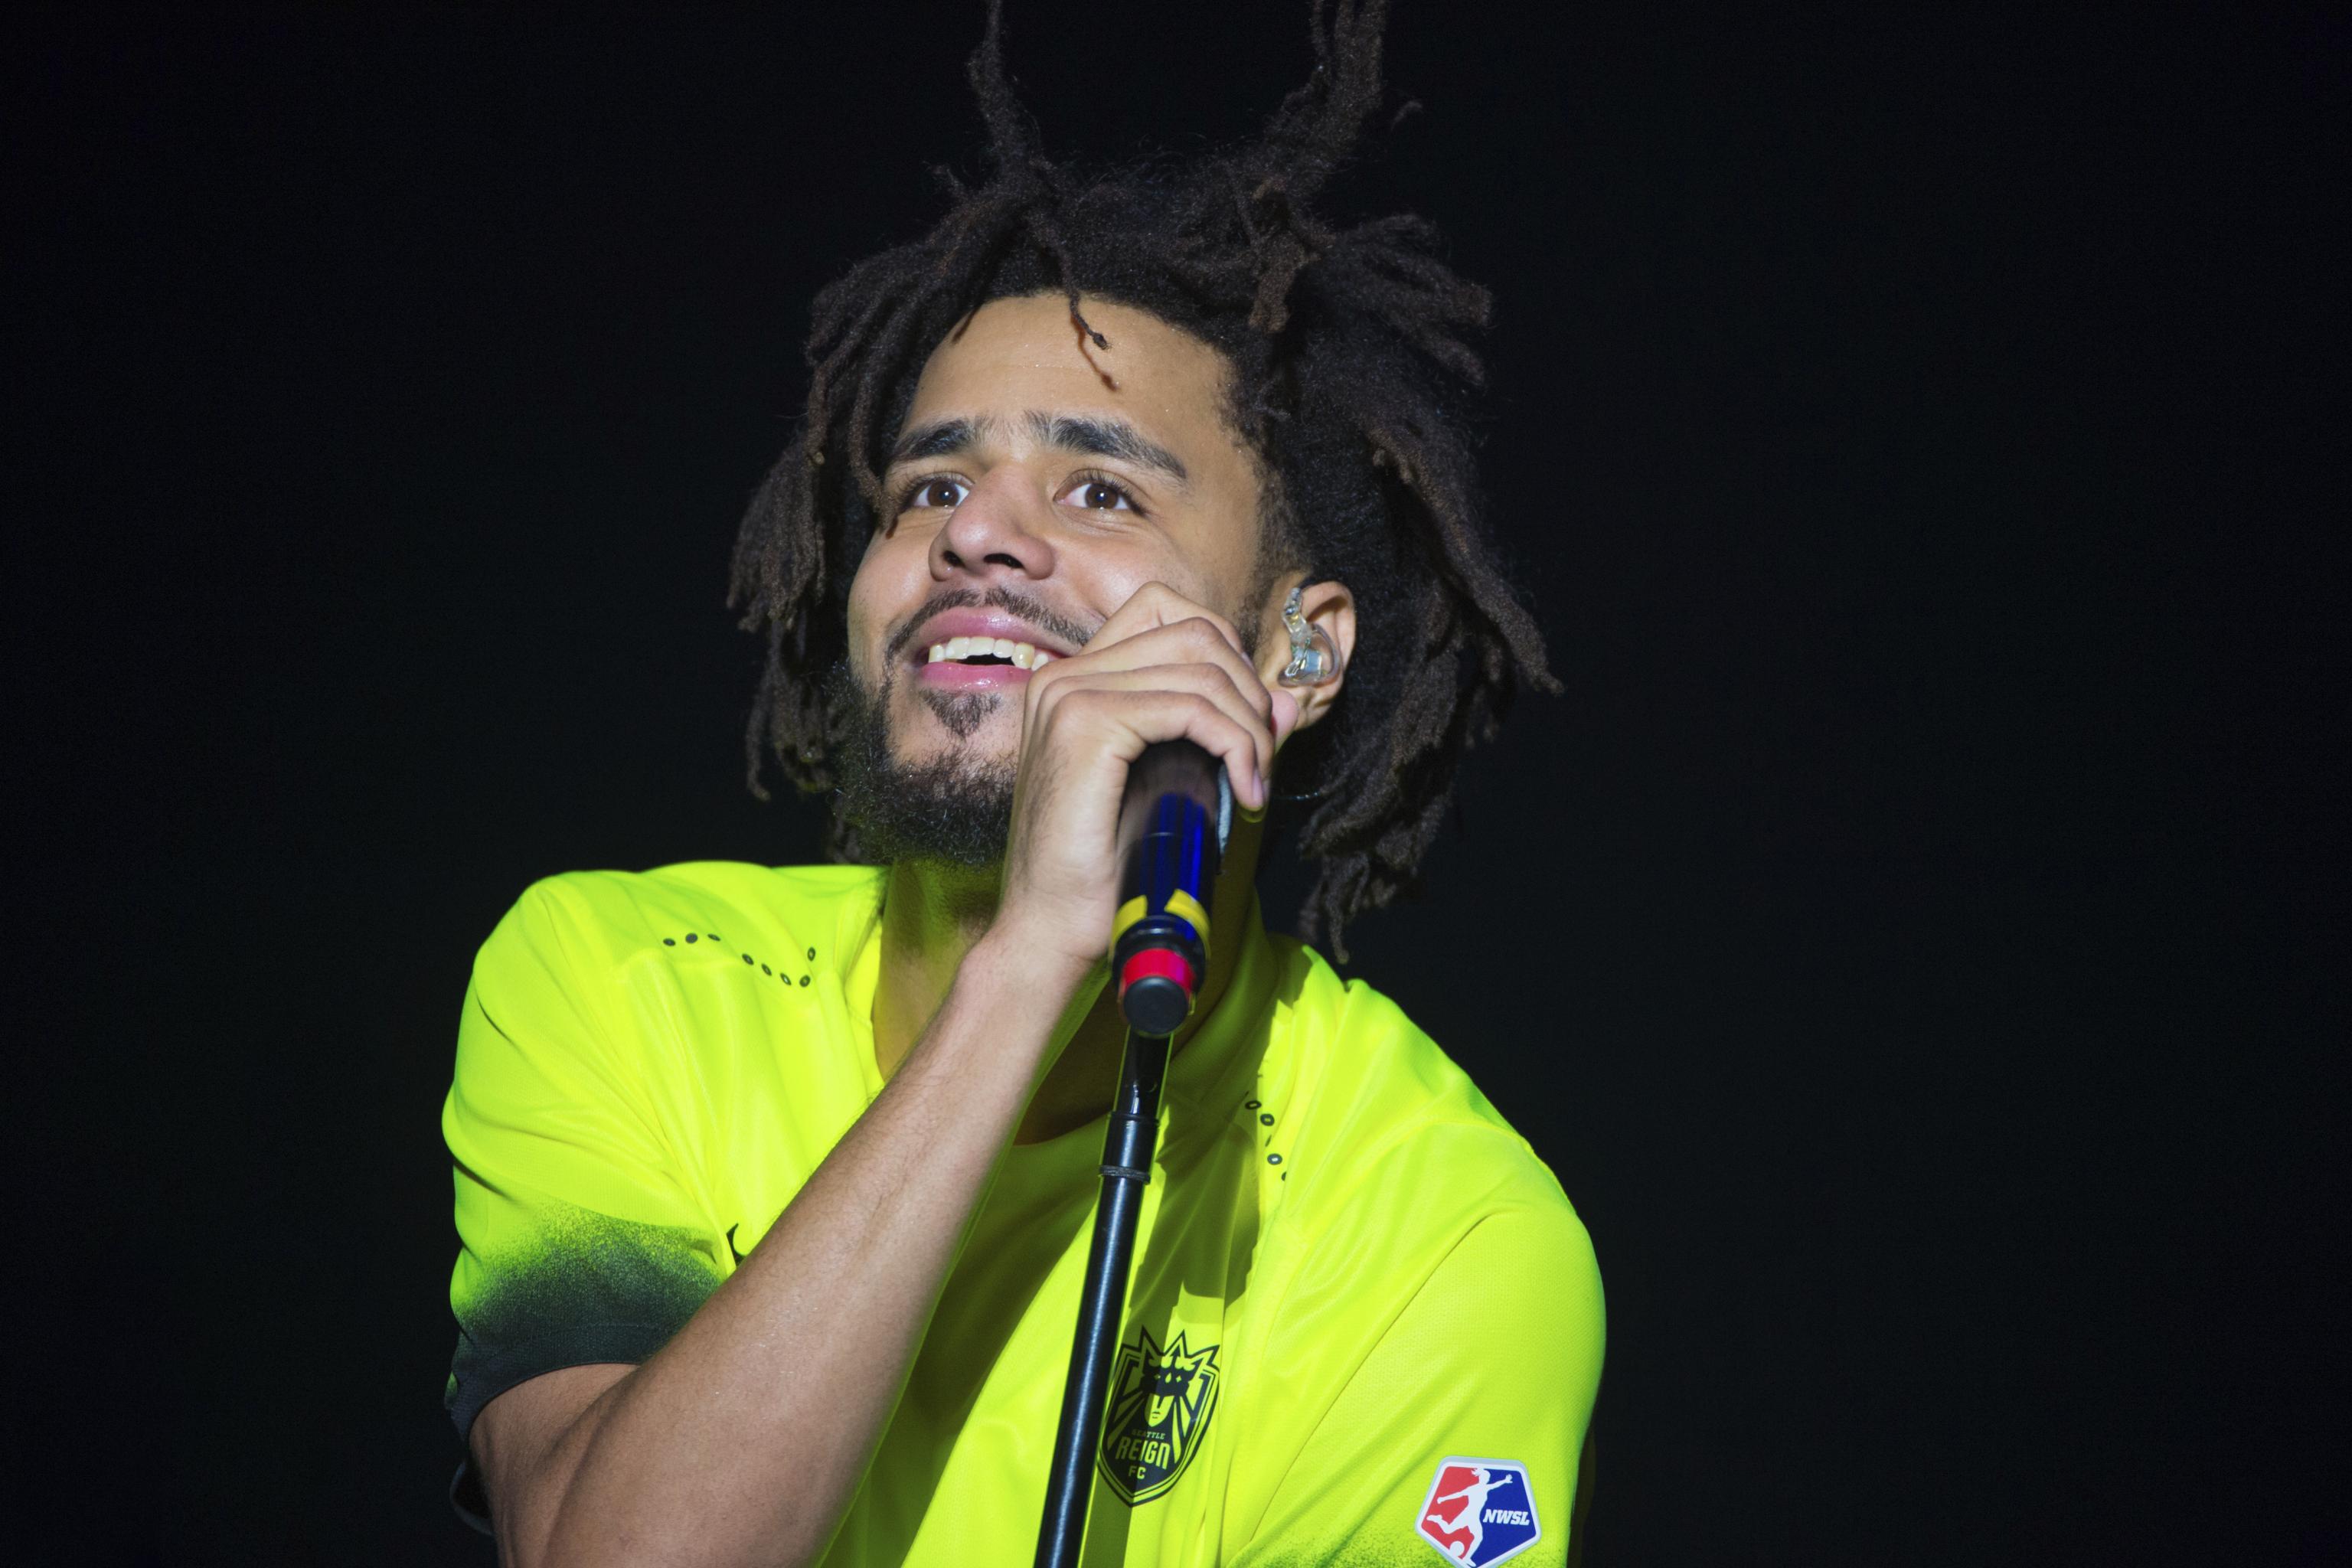 J Cole Announced As 2019 Nba All Star Game Halftime Performer Bleacher Report Latest News Videos And Highlights